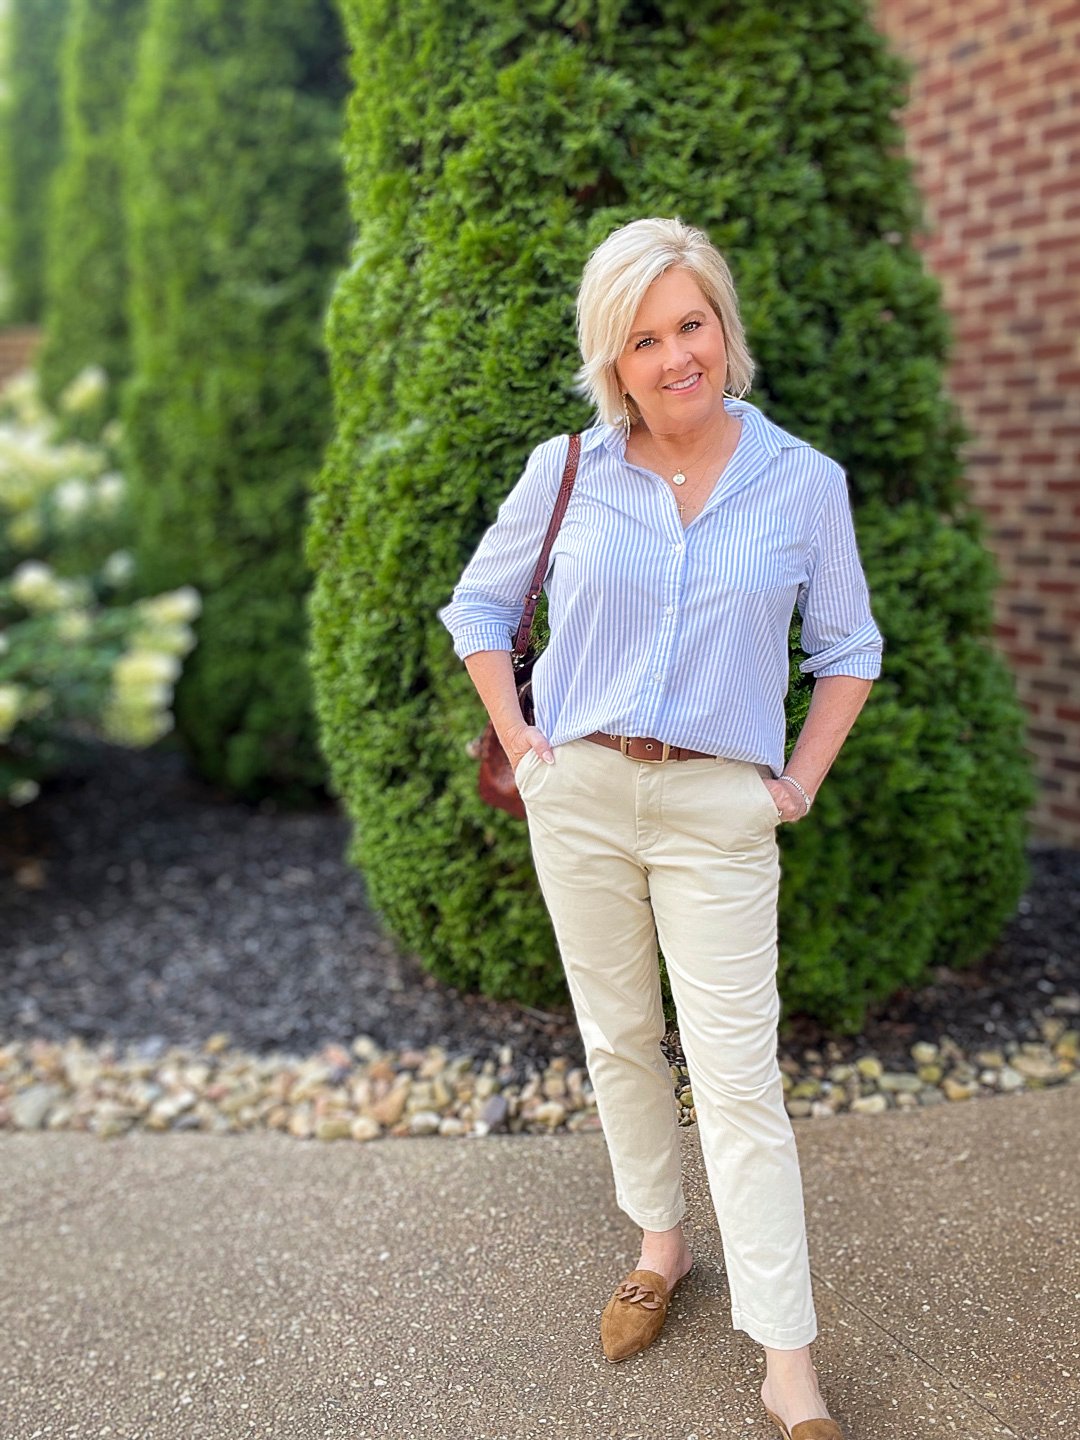 Over 40 Fashion Blogger, Tania Stephens is showing how to style Chinos and a striped shirt for summer5